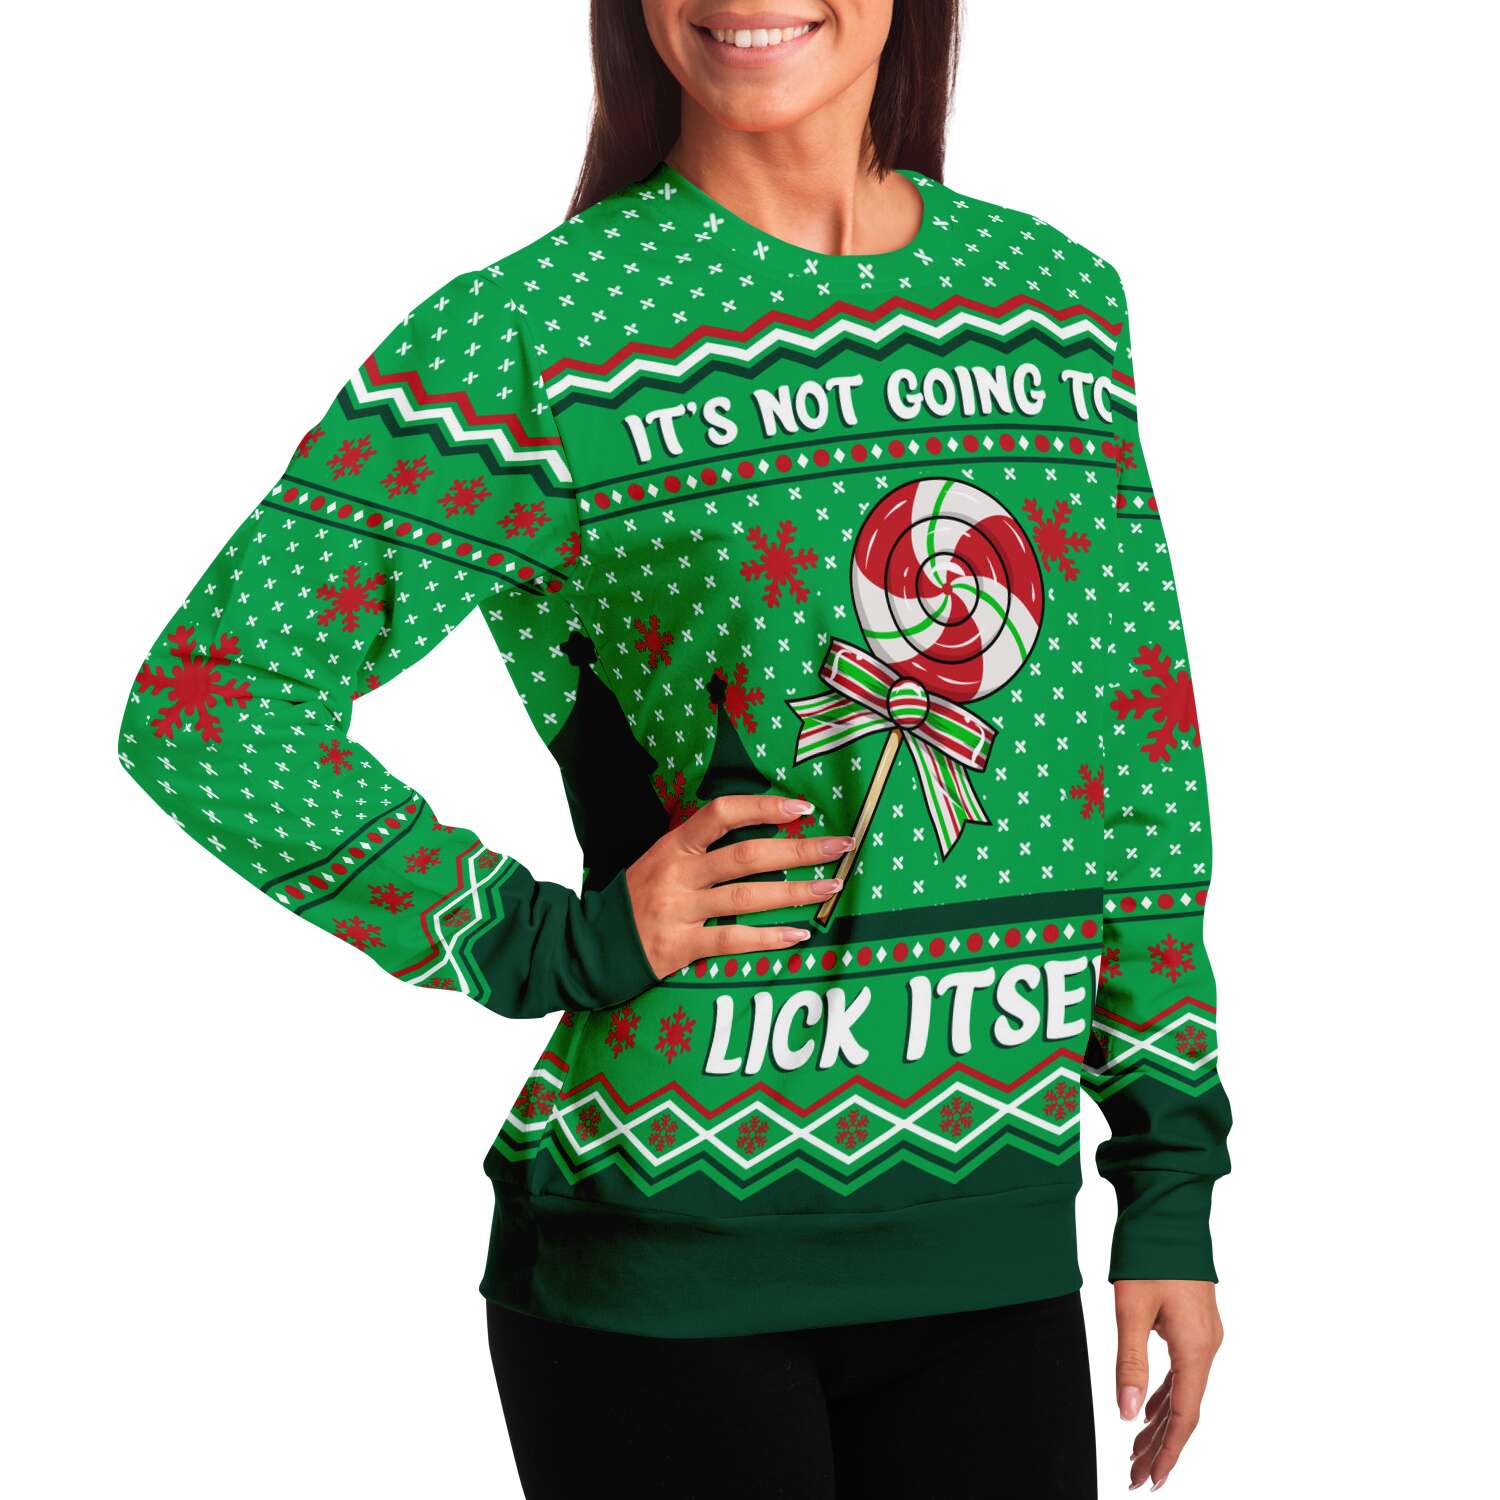 It's Not Going to Lick Itself - Funny Inappropriate Ugly Christmas Sweater (Sweatshirt)